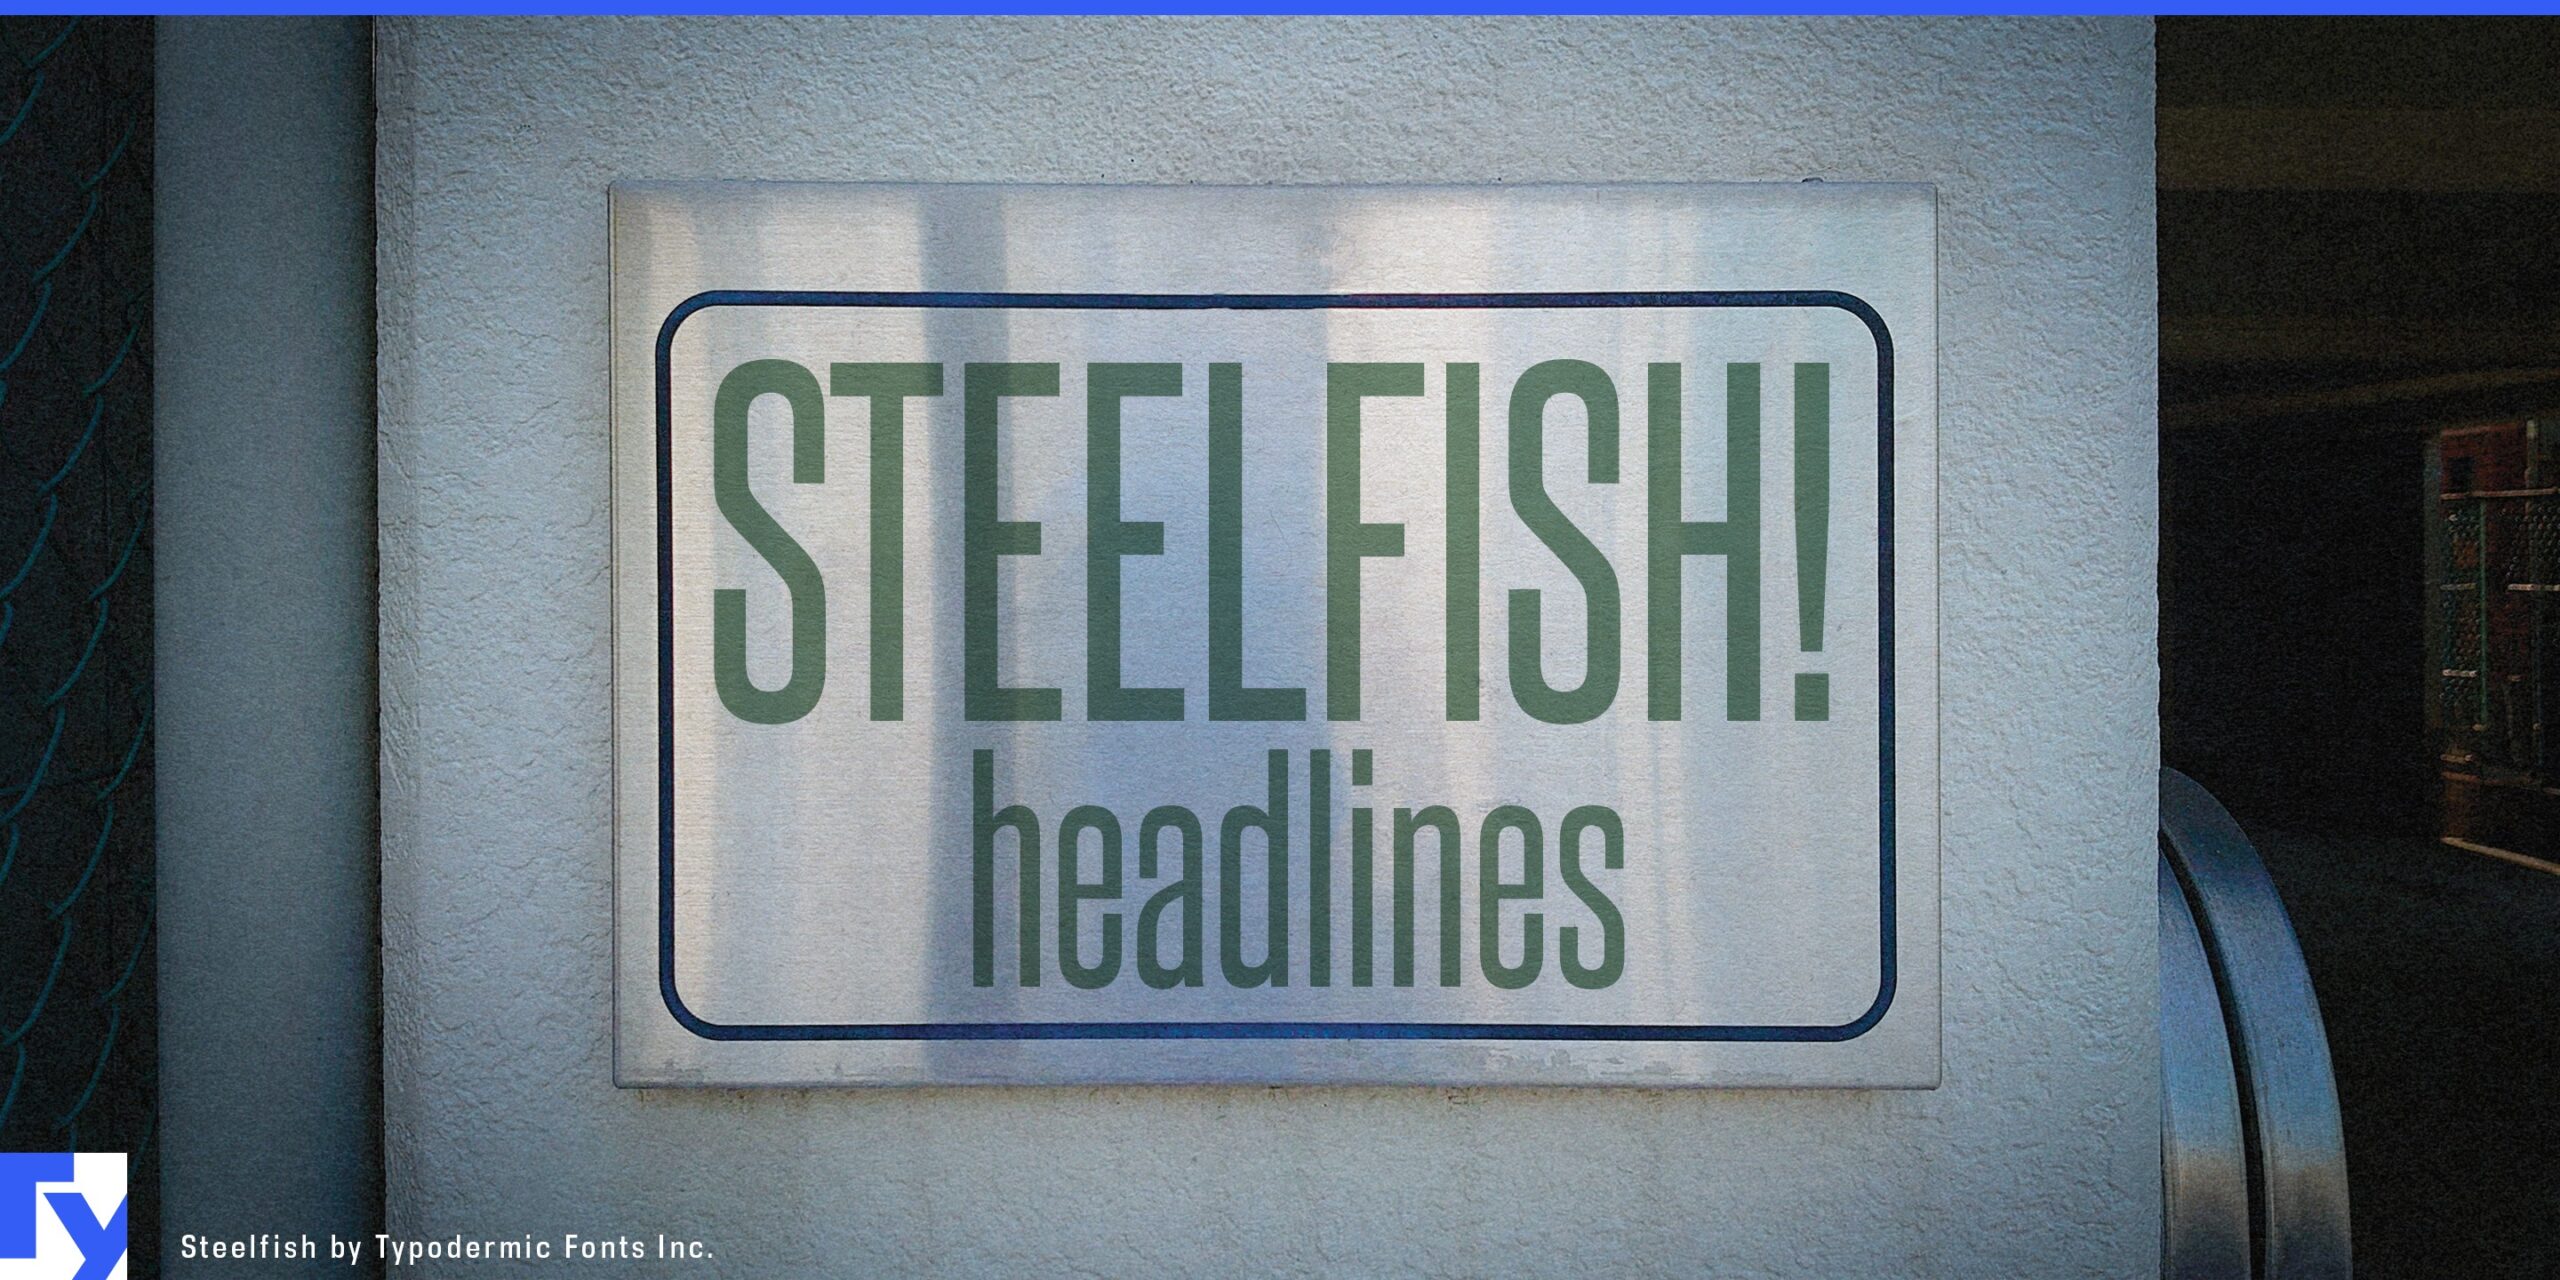 Let Steelfish be your go-to typeface for projects that require efficiency and style.